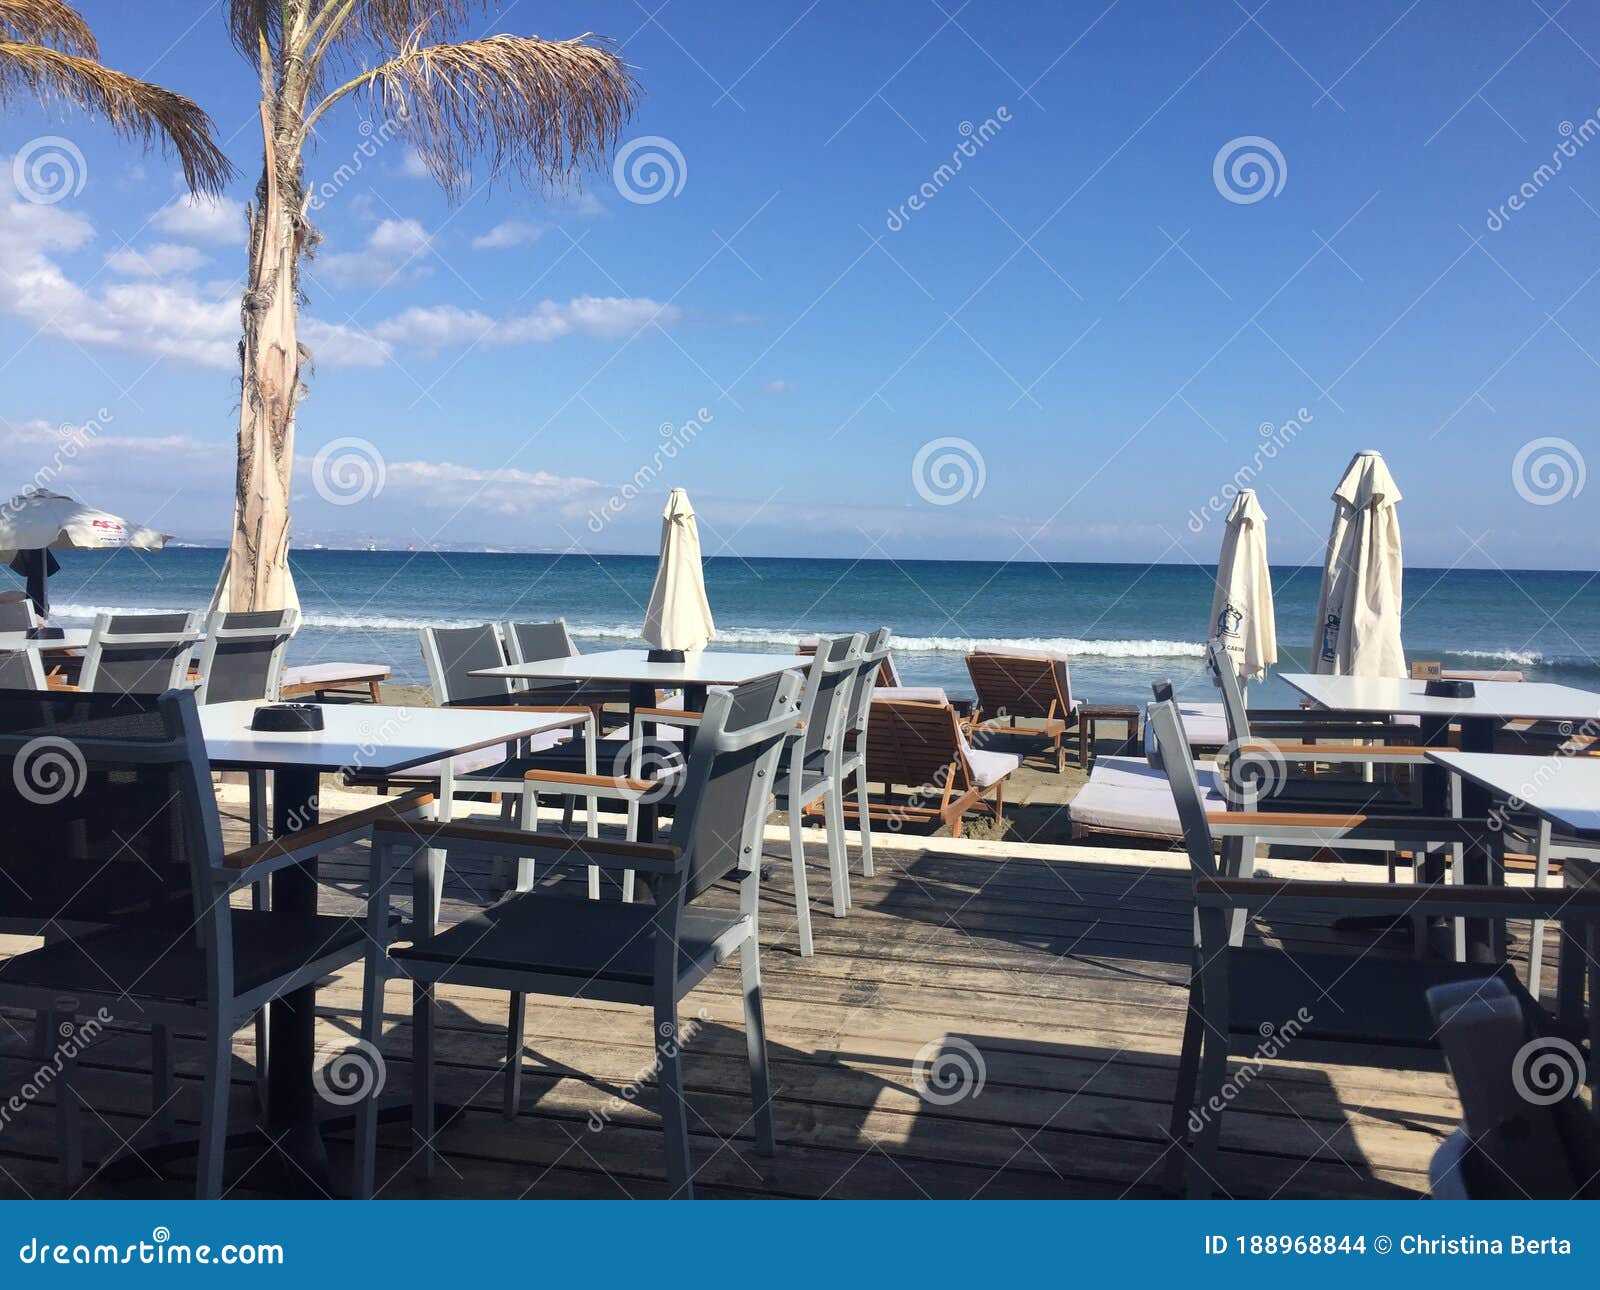 A Restaurant Terrace Overlooking the Sea in Cyprus Stock Photo - Image ...